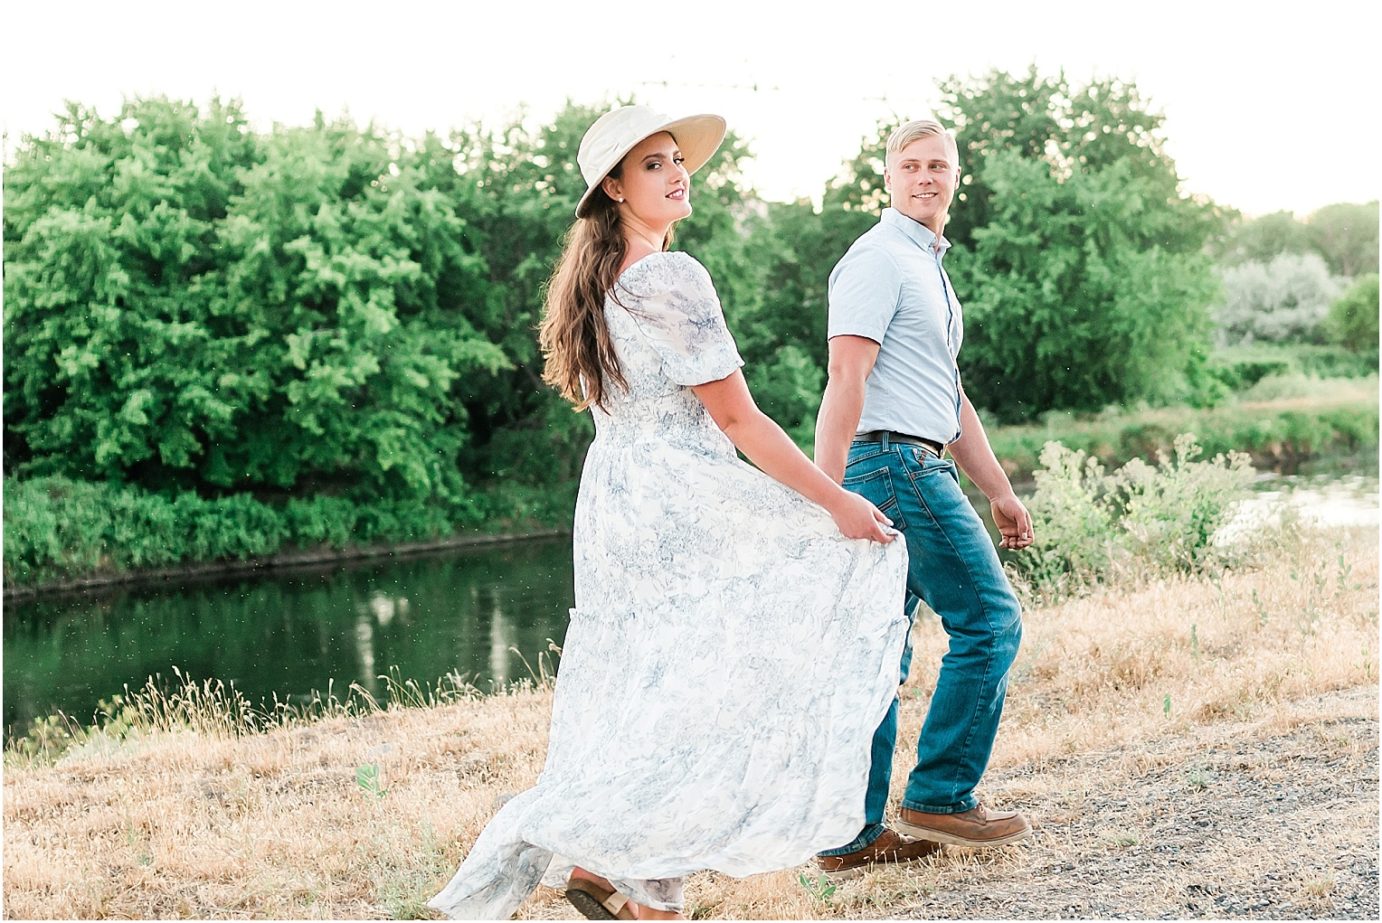 richland engagement session richland photographer Nate and Jacqueline walking by the river